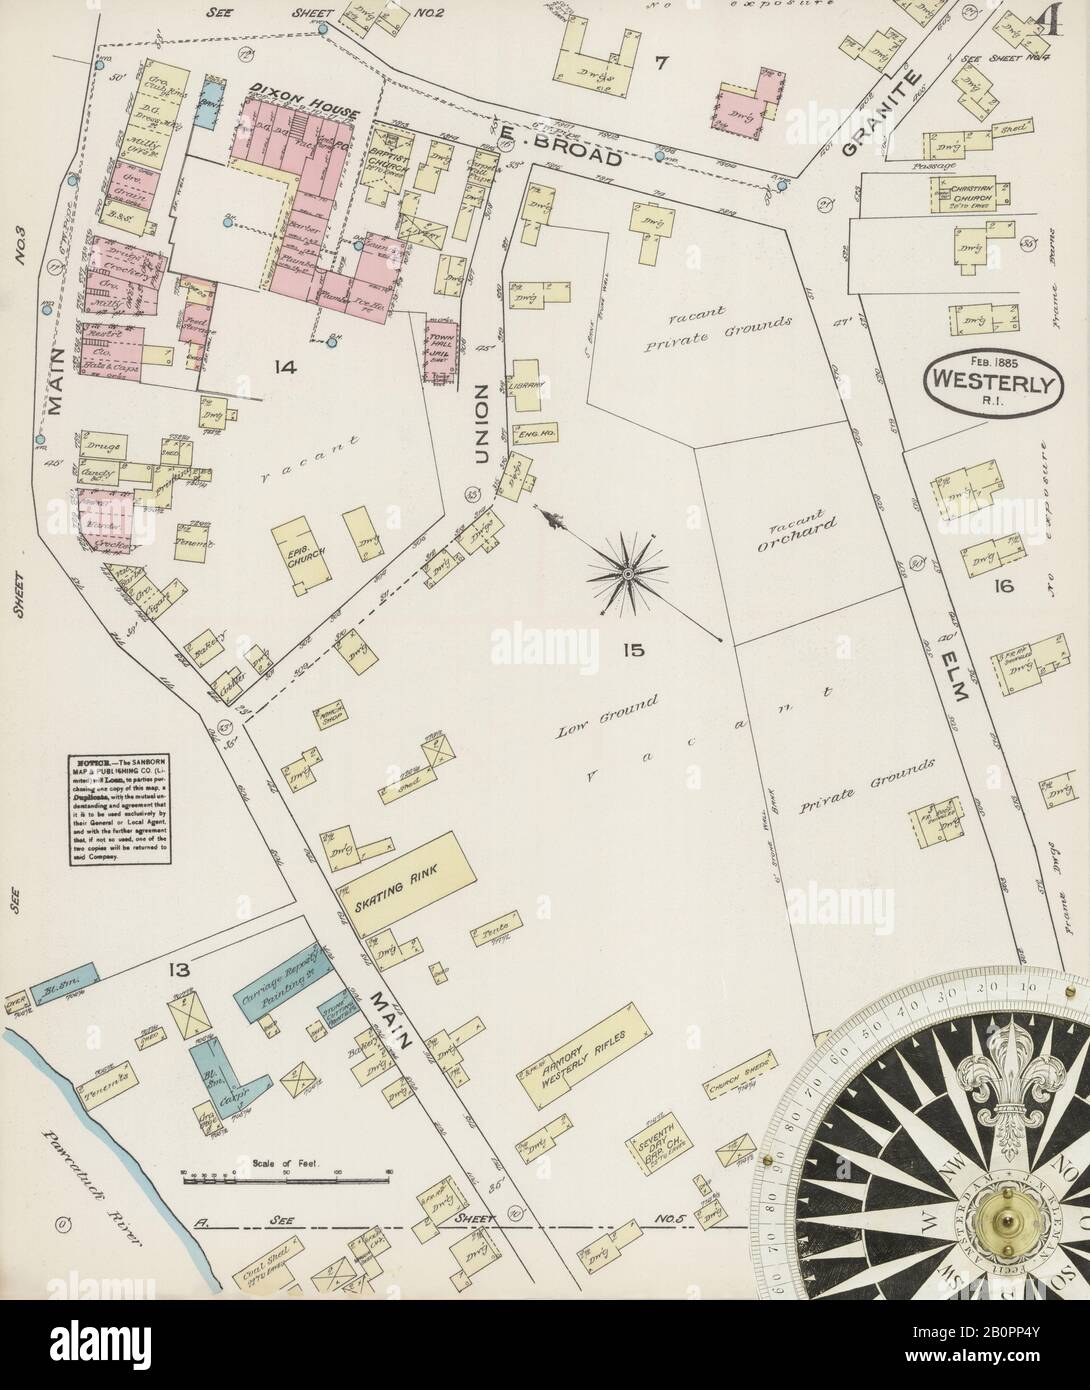 Image 4 of Sanborn Fire Insurance Map from Westerly, Washington County, Rhode Island. Feb 1885. 7 Sheet(s), America, street map with a Nineteenth Century compass Stock Photo